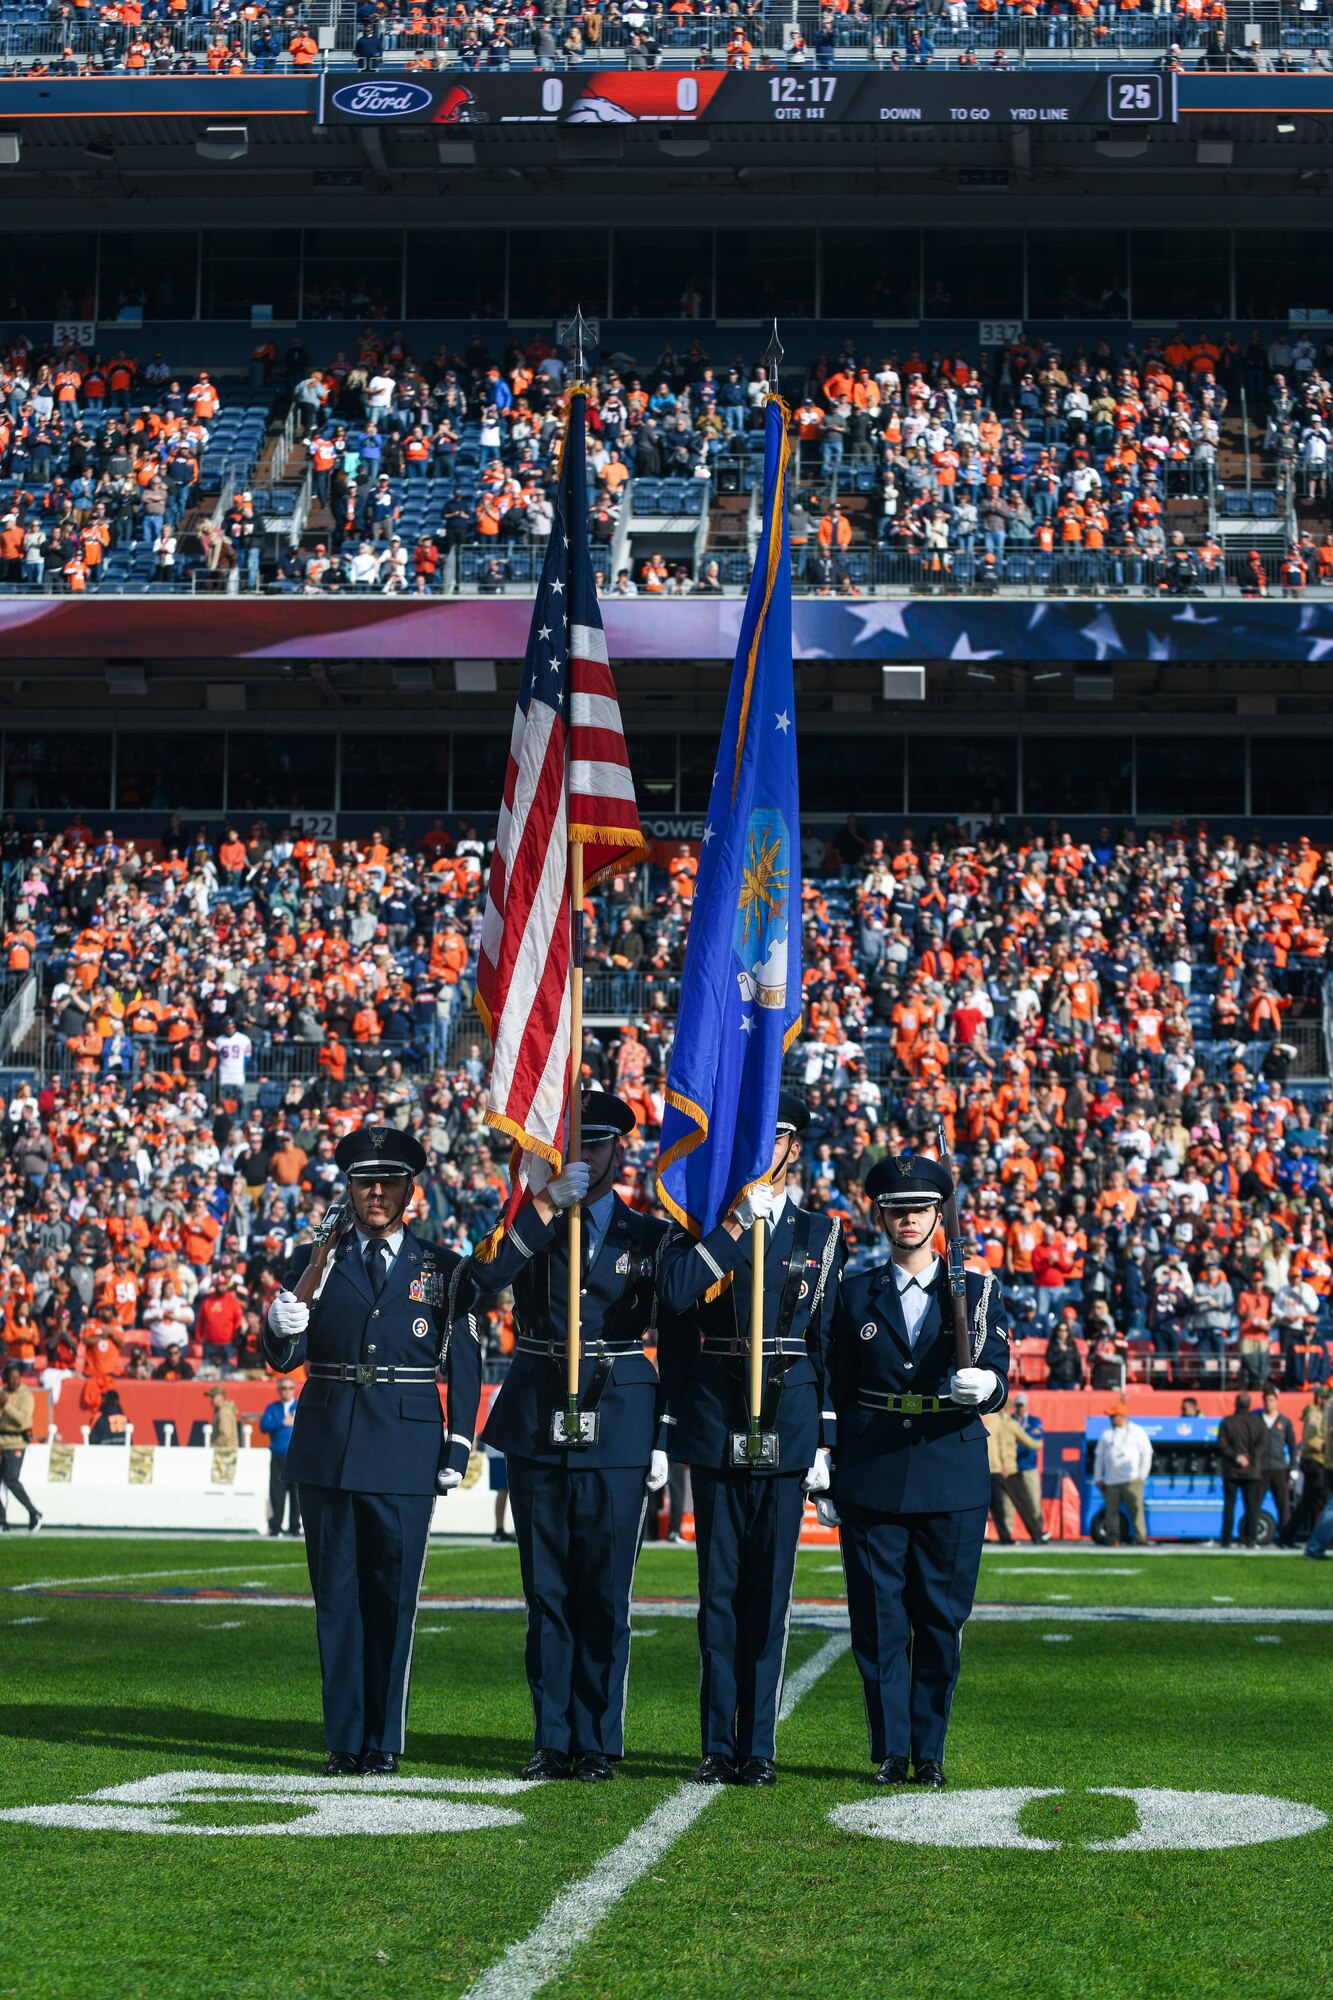 Buckley Air Force Base Mile High honor guardsmen prepare to present the colors before the Denver Broncos Salute to Service game at Empower Field at Mile High in Denver, Nov. 3, 2019.